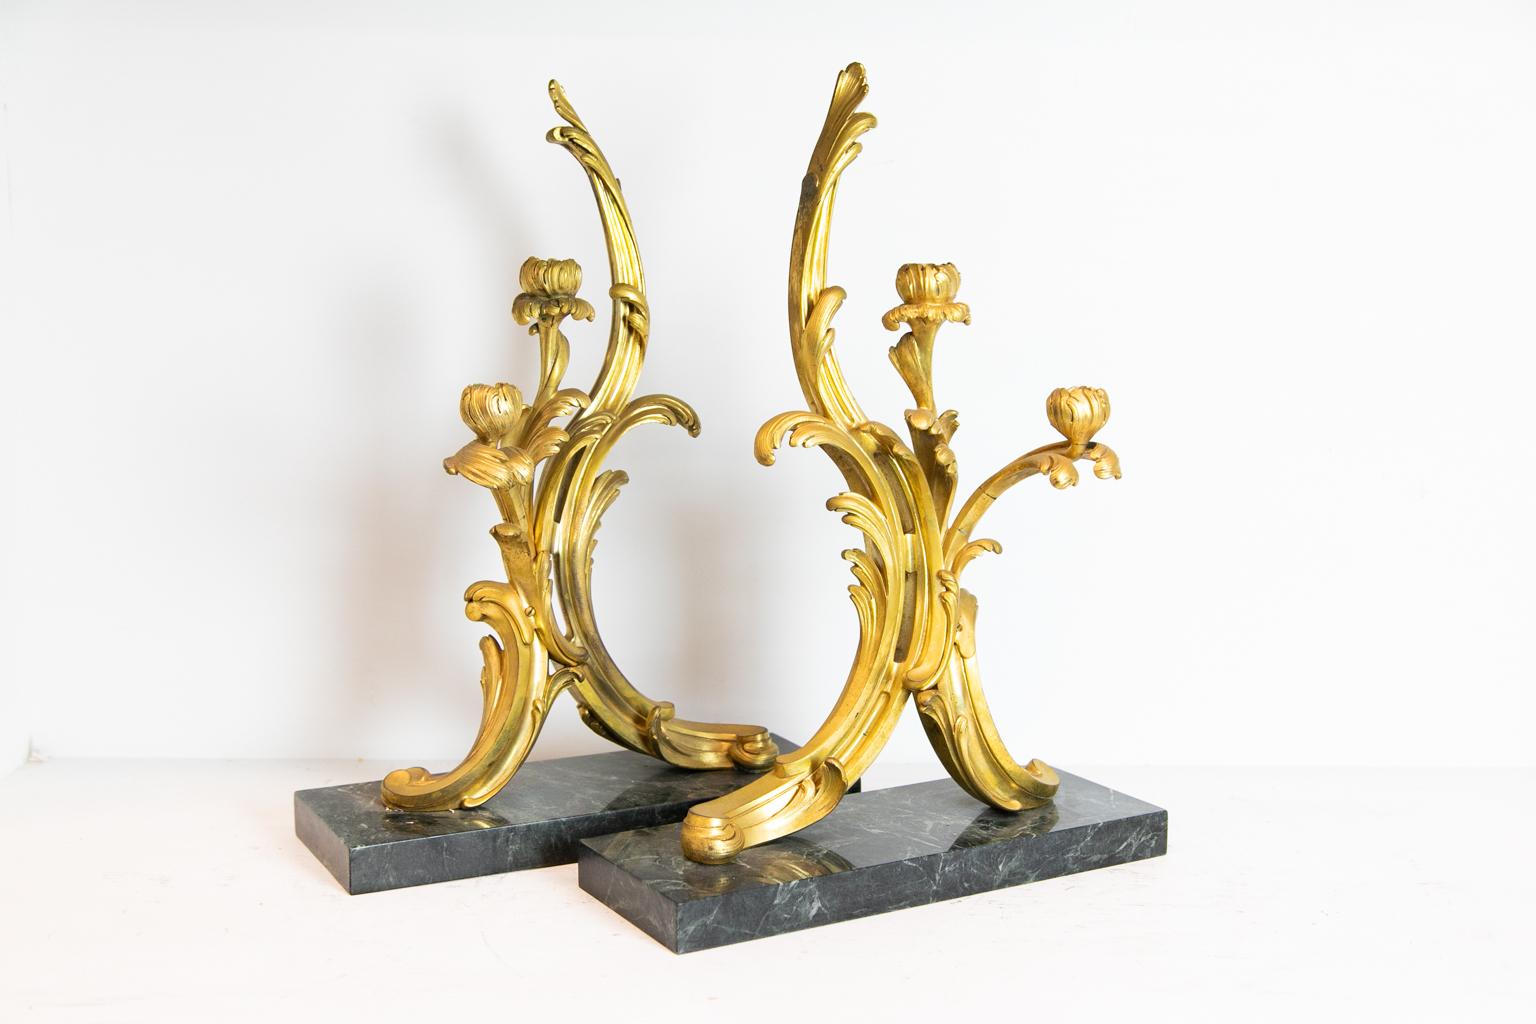 Pair of French Ormolu Candelabra In Good Condition For Sale In Wilson, NC